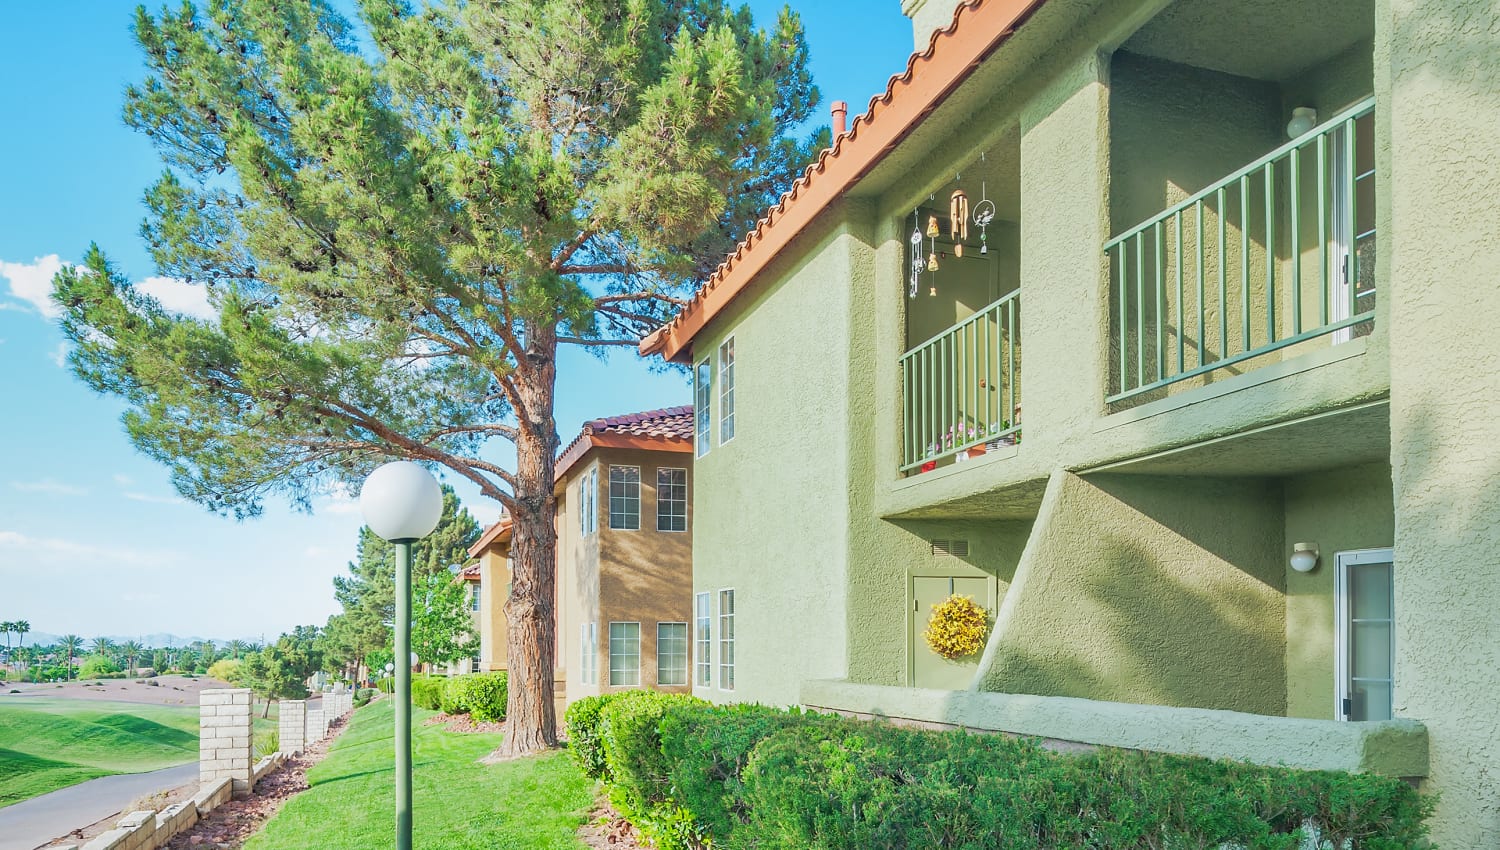 Exterior apartment views and golf course at Invitational Apartments in Henderson, Nevada